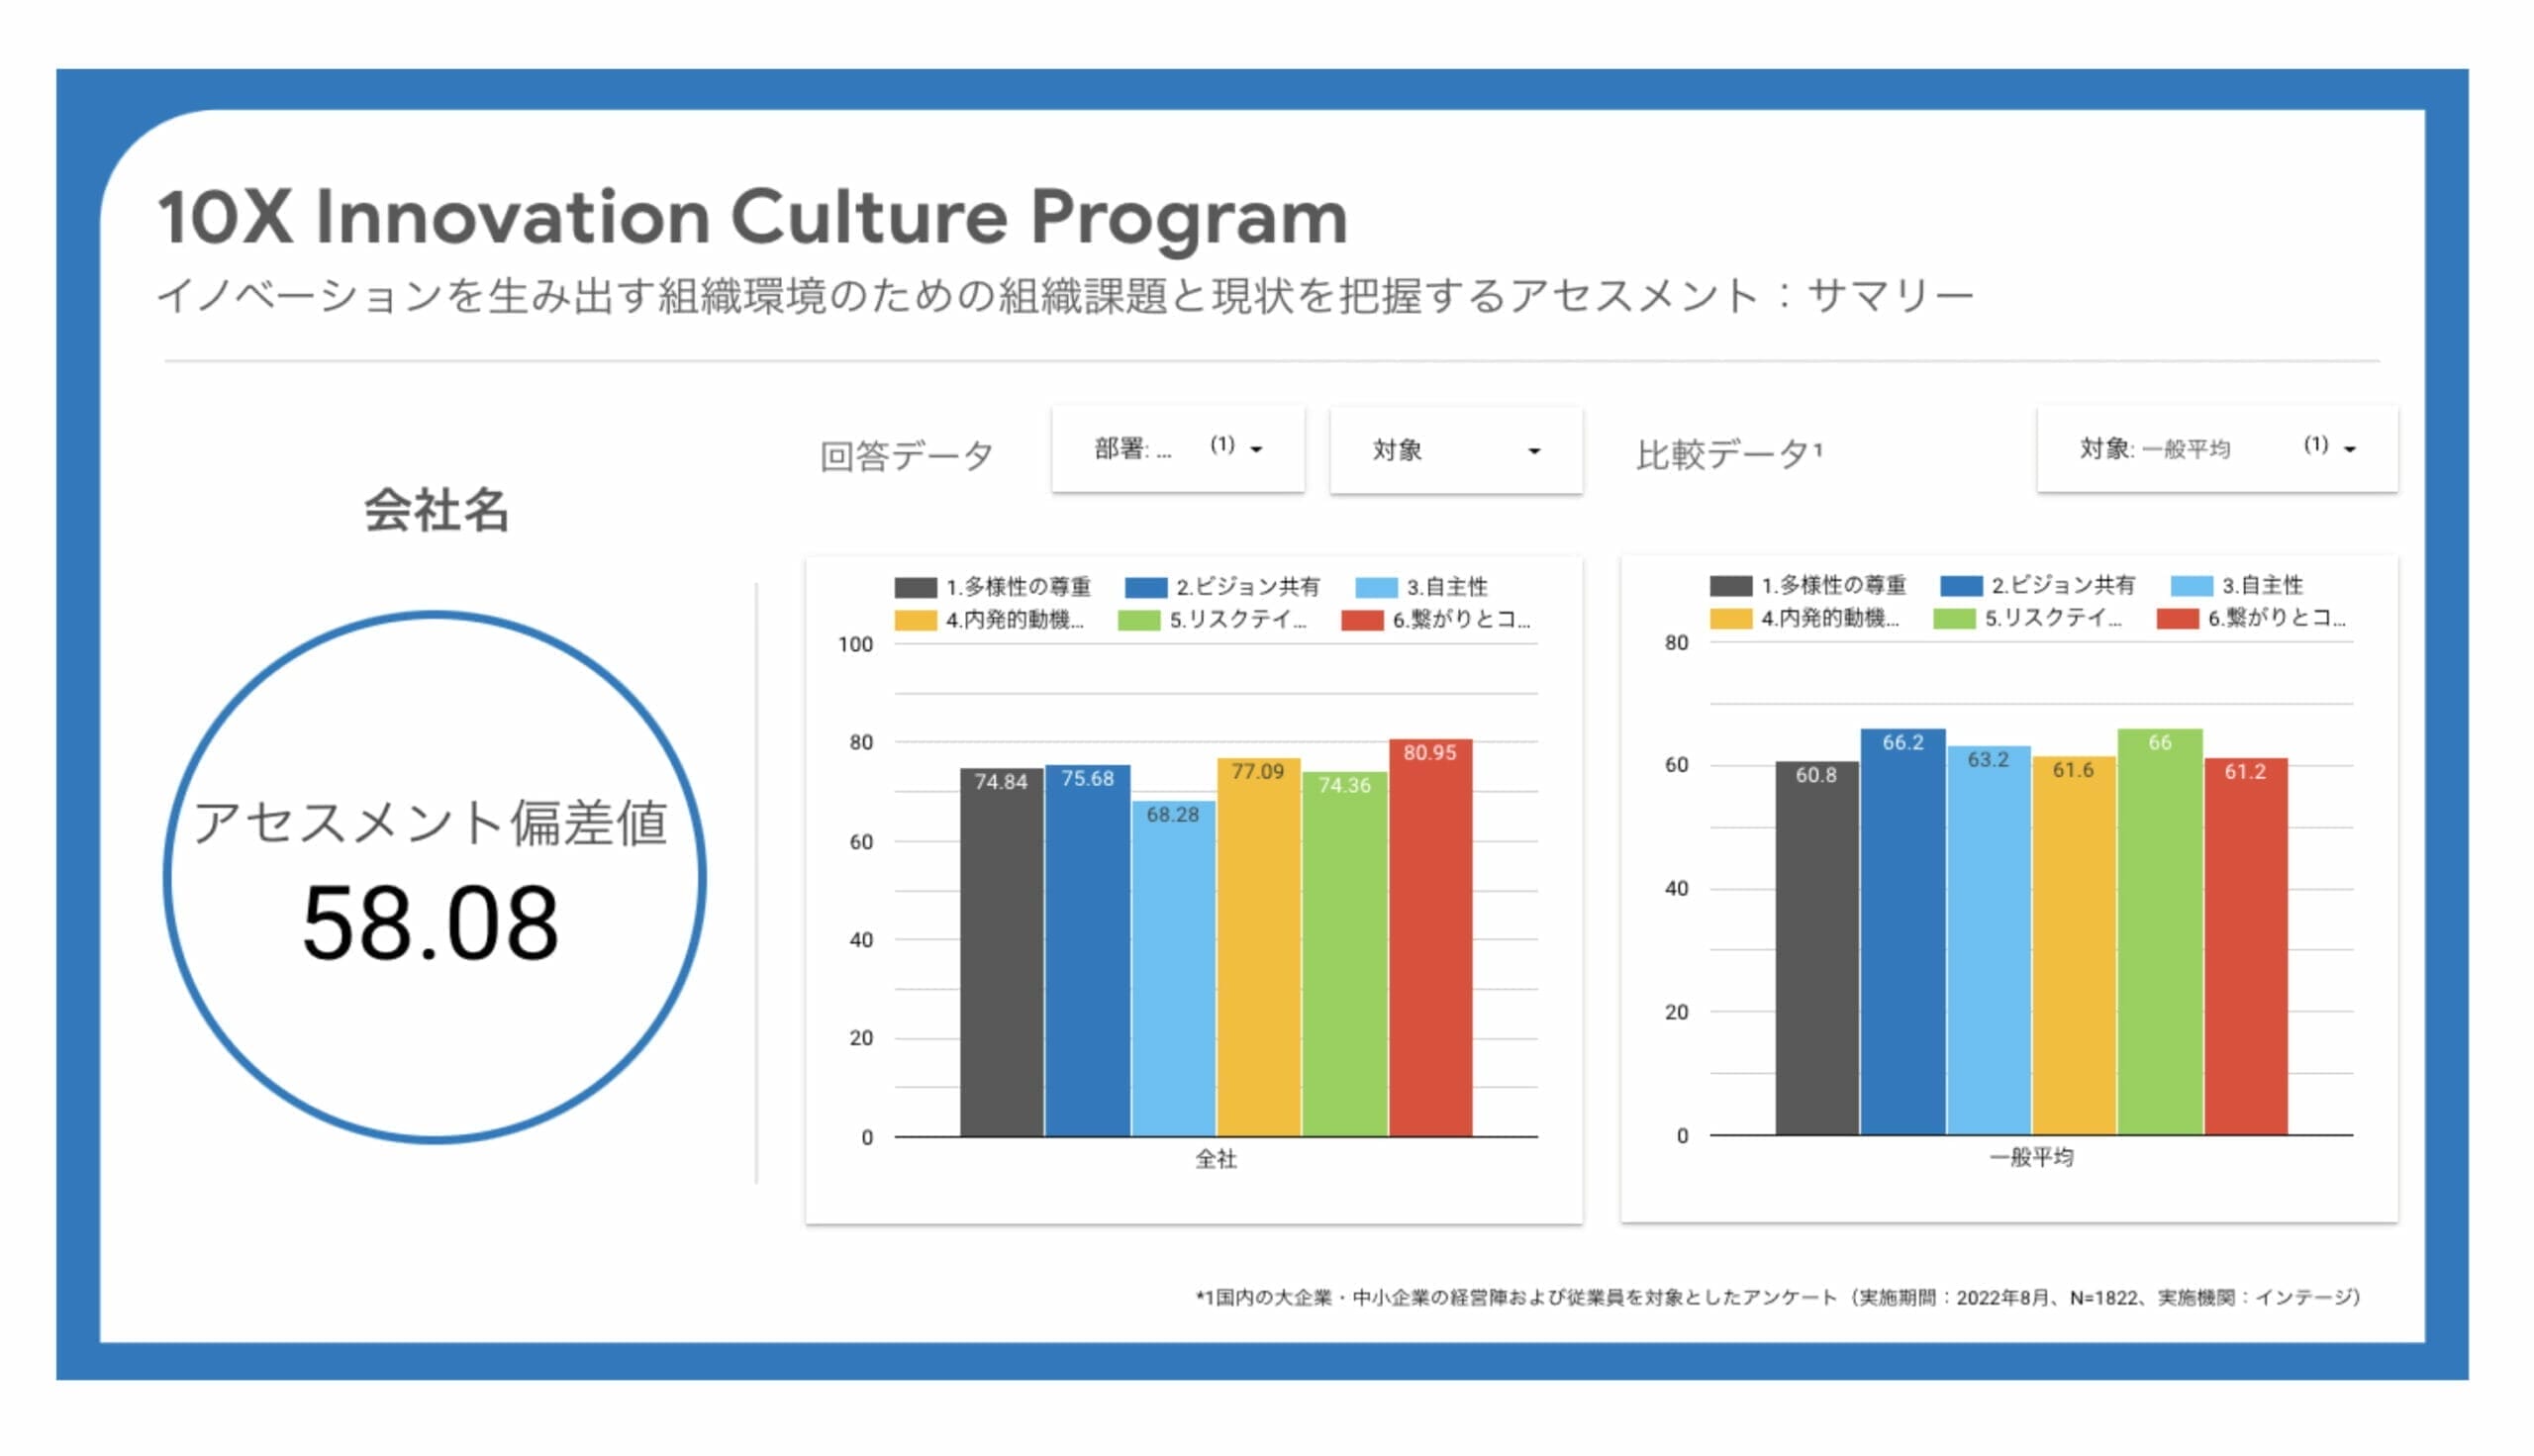 [10X Innovation Culture Program] Innovation Readiness アセスメントツール